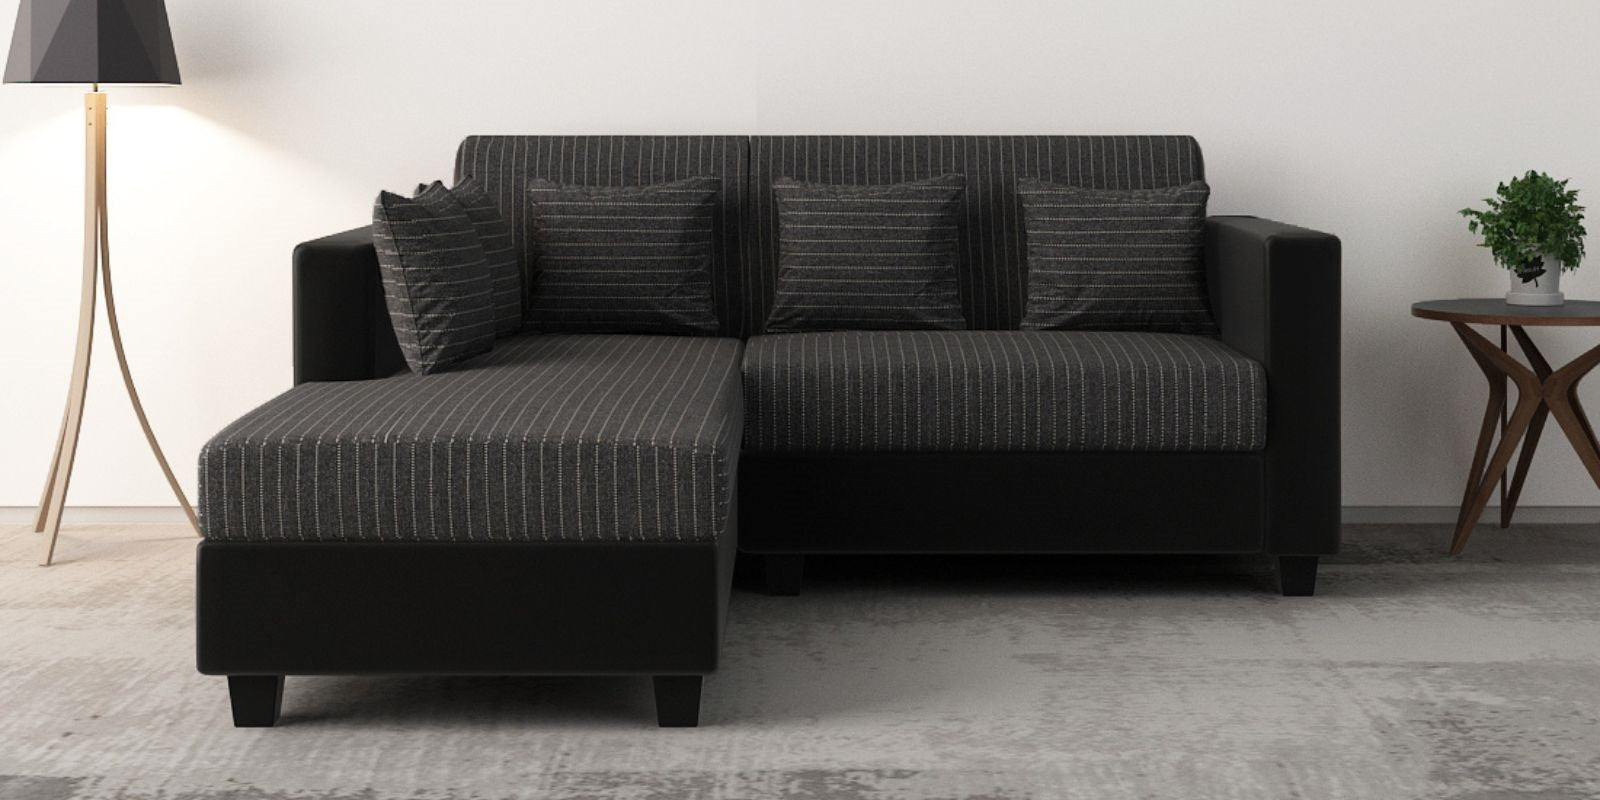 Baley Fabric RHS Sectional Sofa (2 + Lounger) In Lama Black Colour